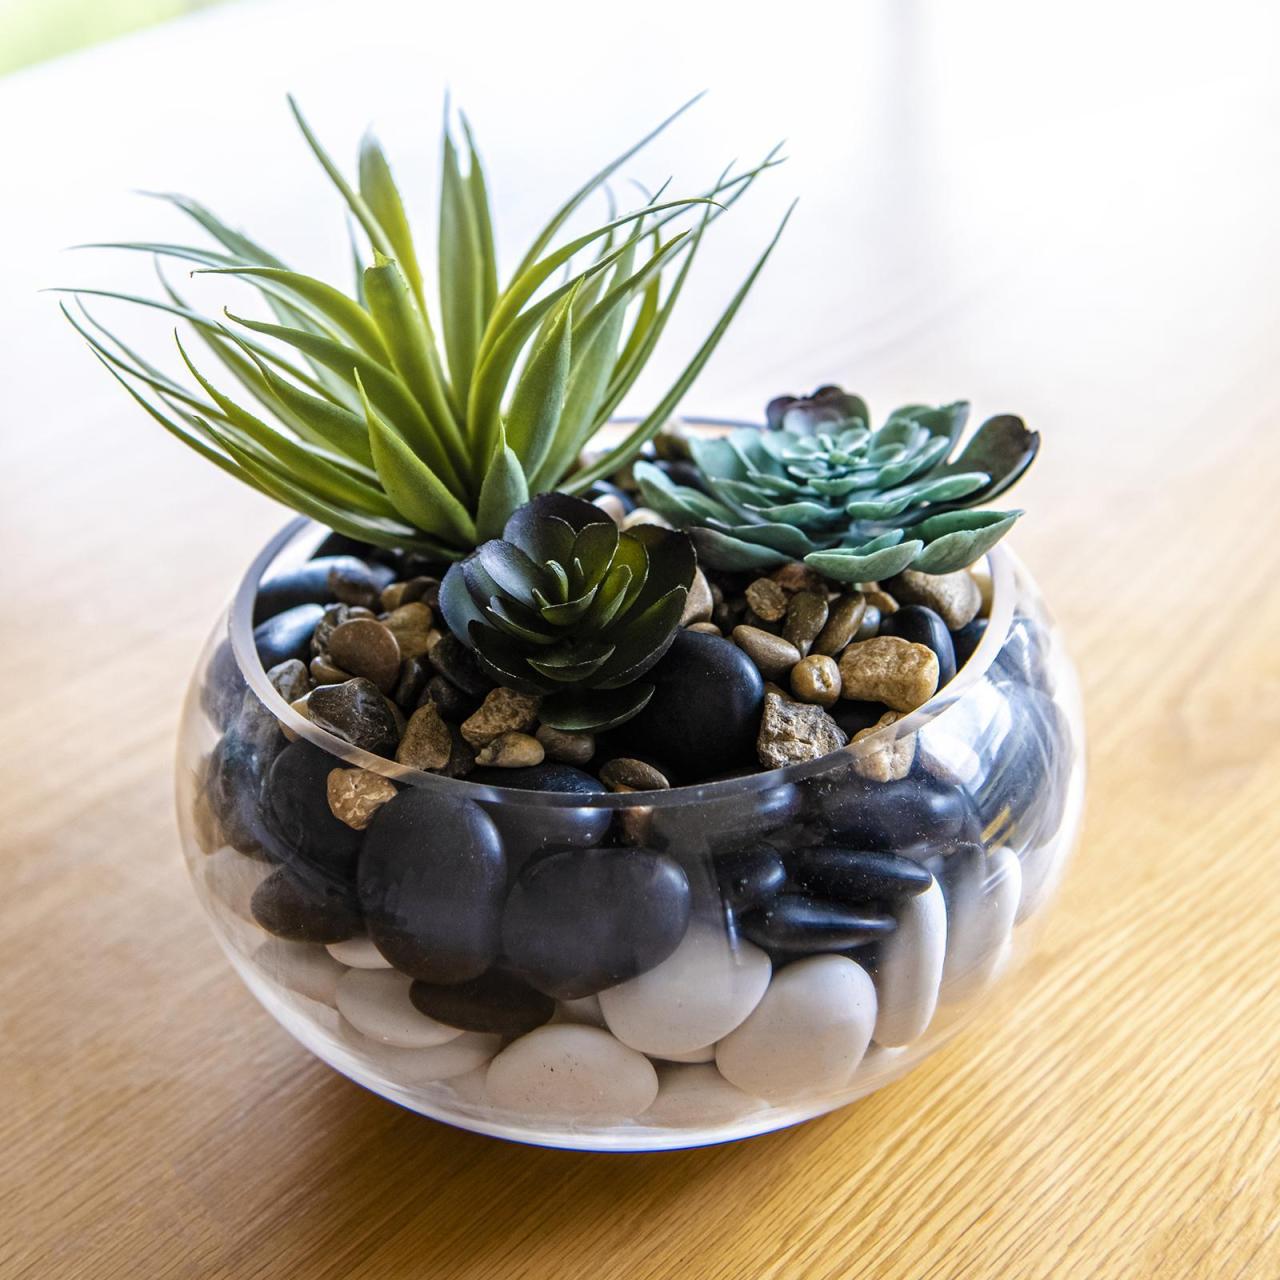 Hanging Plants Indoor | Bunnings Bowl Planter: Stylish Designs, Plant Selection, and DIY Projects